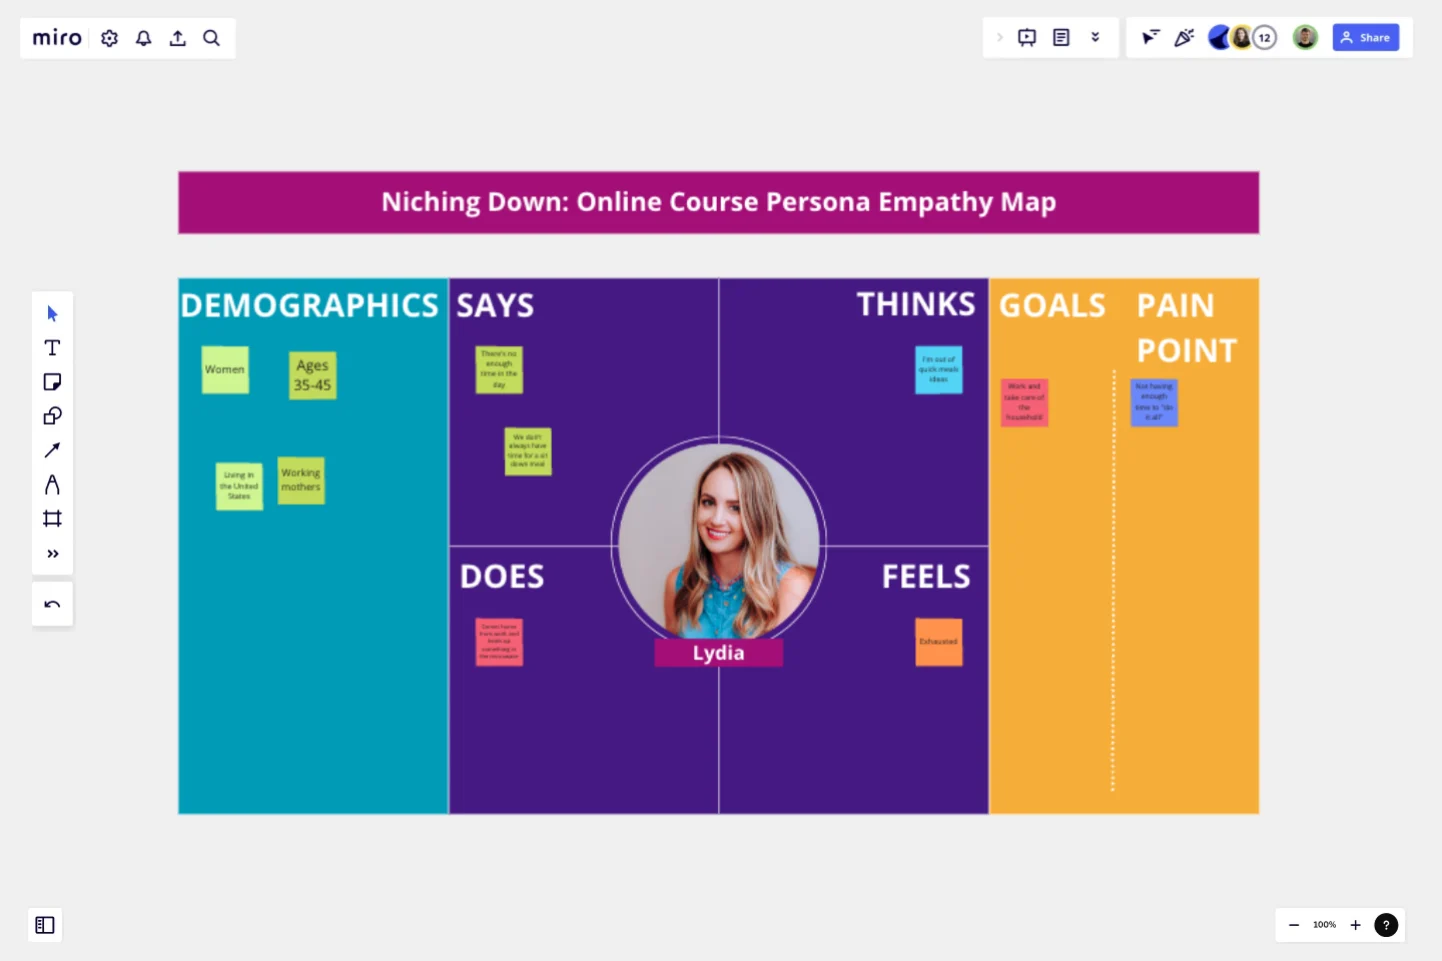 Niching Down Online Course Persona Empathy Map template